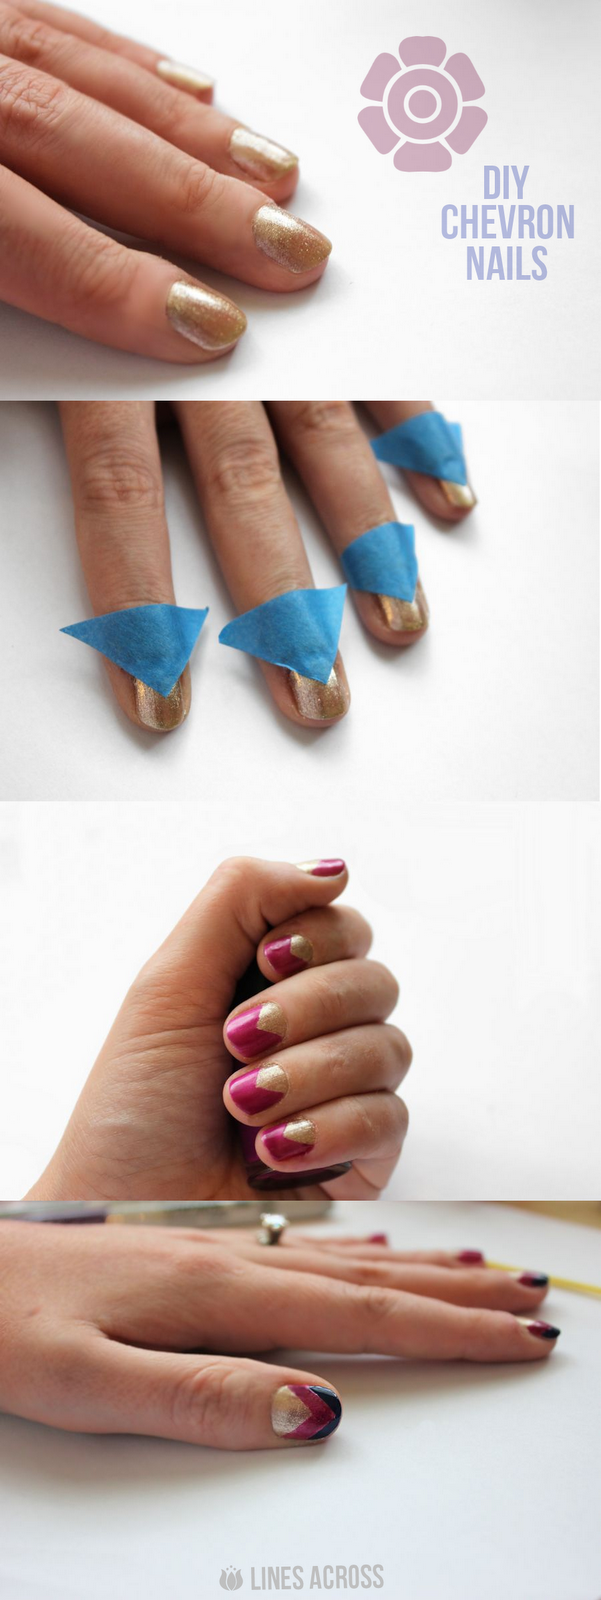 DIY Chevron Nails from Lines Across #beauty #nails